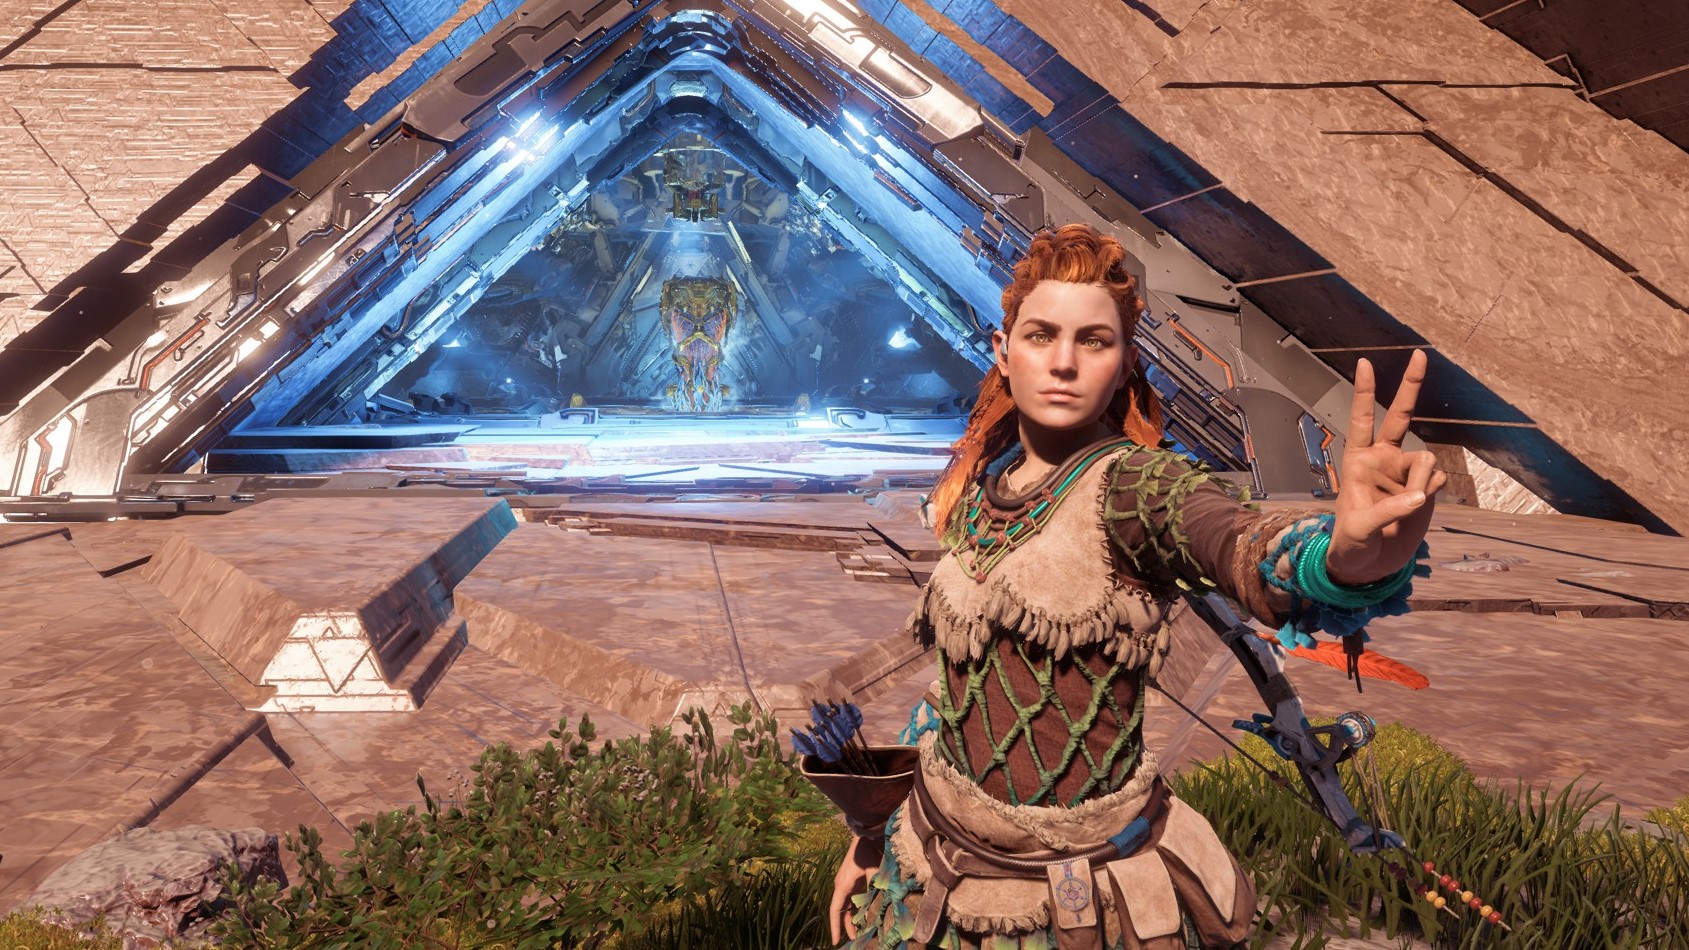 Pc Controls And A Wider Fov Make Horizon Zero Dawn The Game It Was Meant To Be Pc Gamer